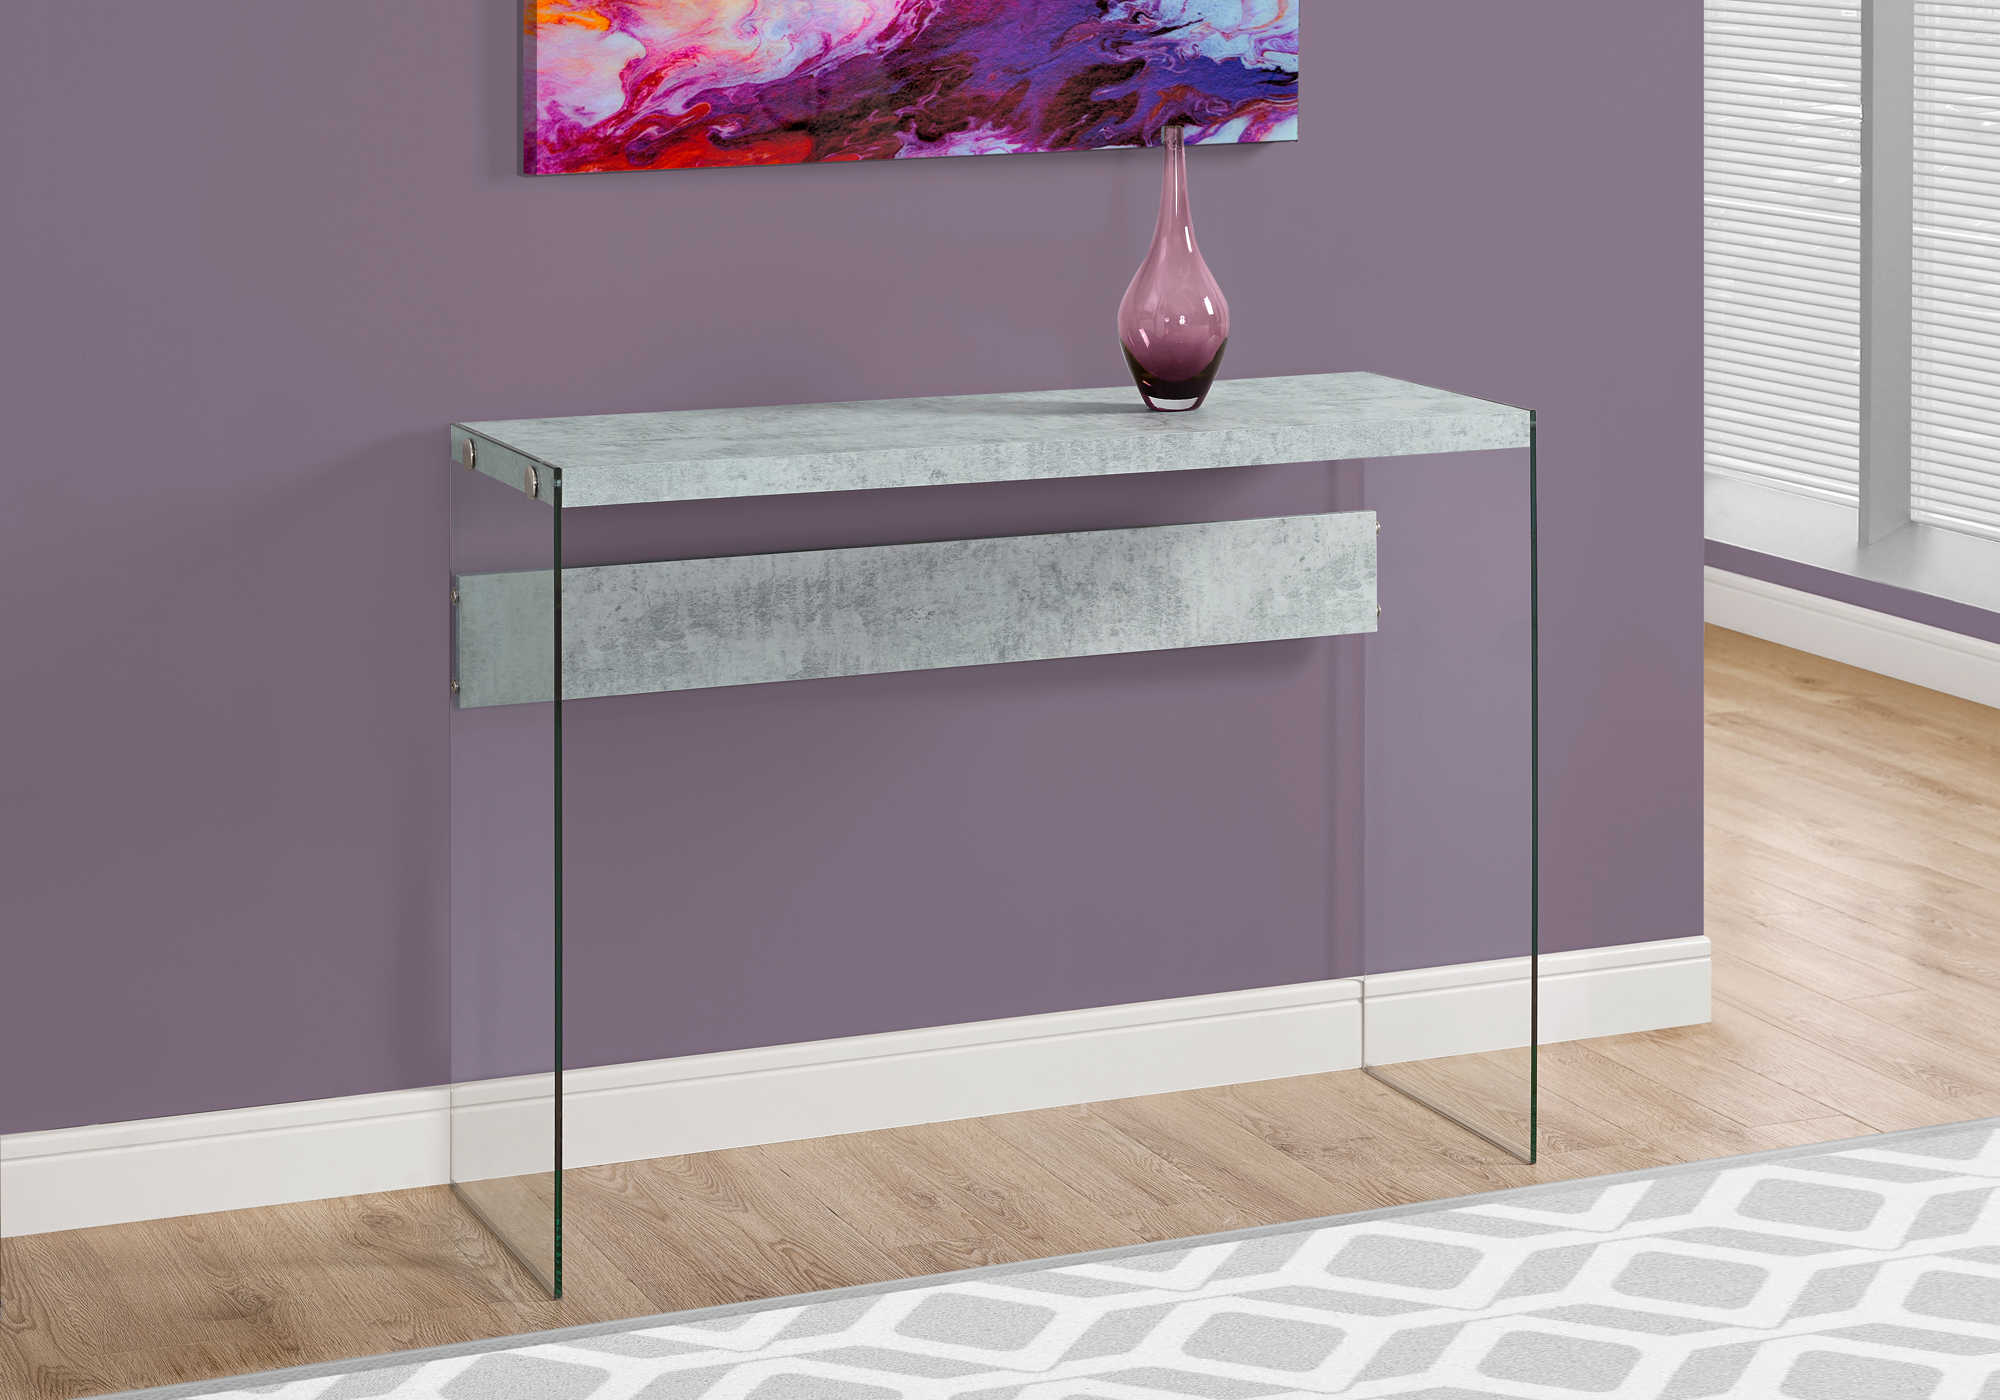 ACCENT TABLE - 44"L / GREY CEMENT / TEMPERED GLASS